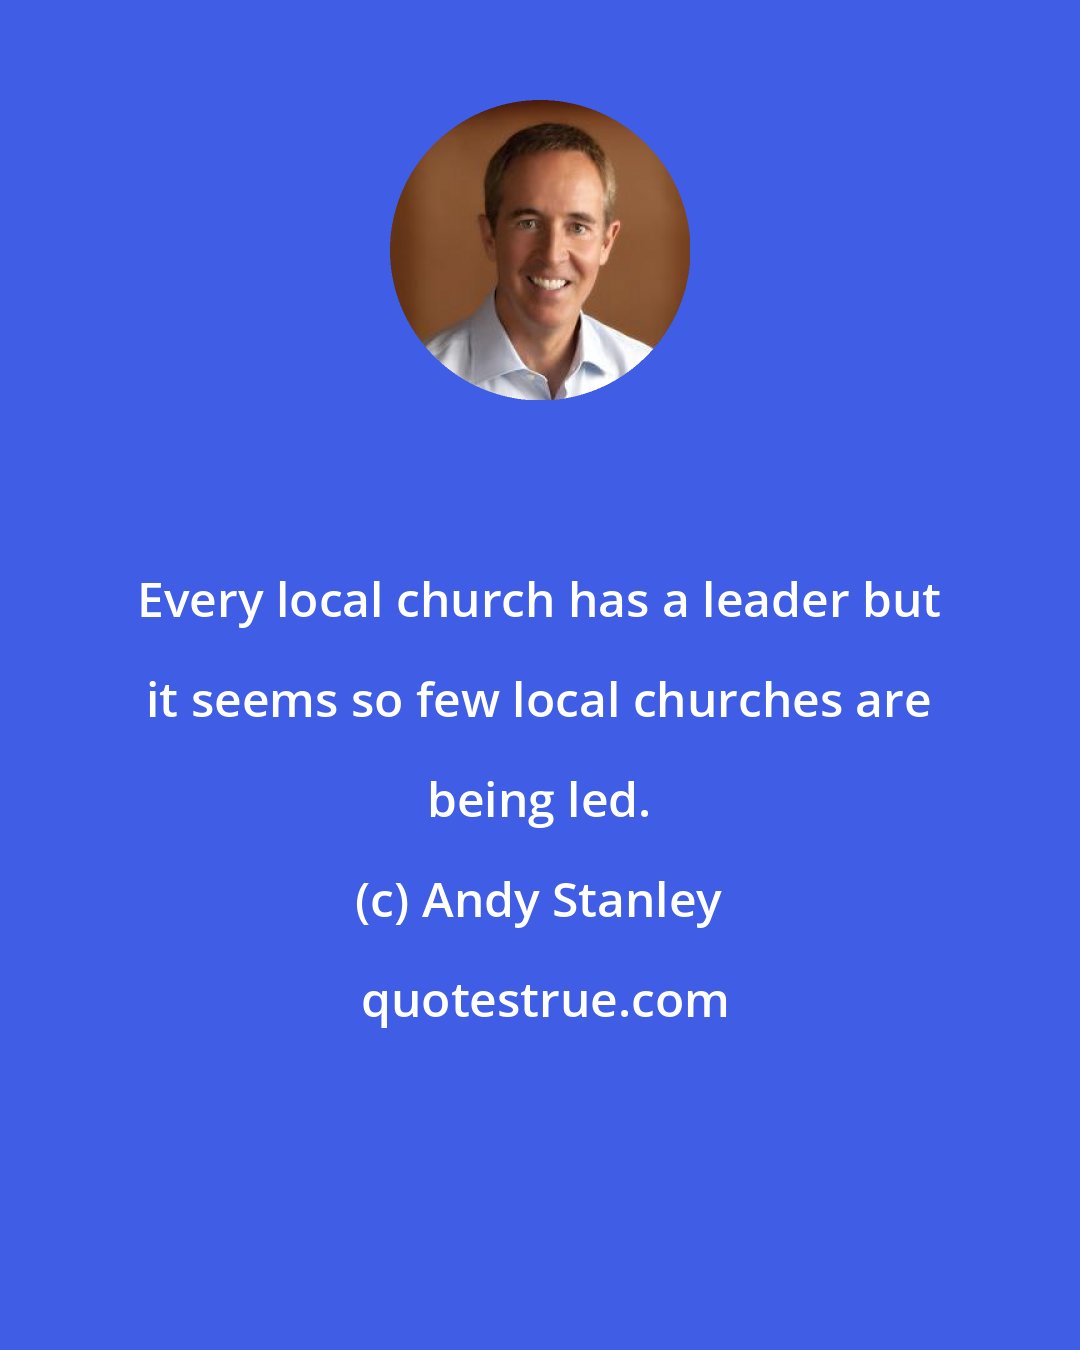 Andy Stanley: Every local church has a leader but it seems so few local churches are being led.